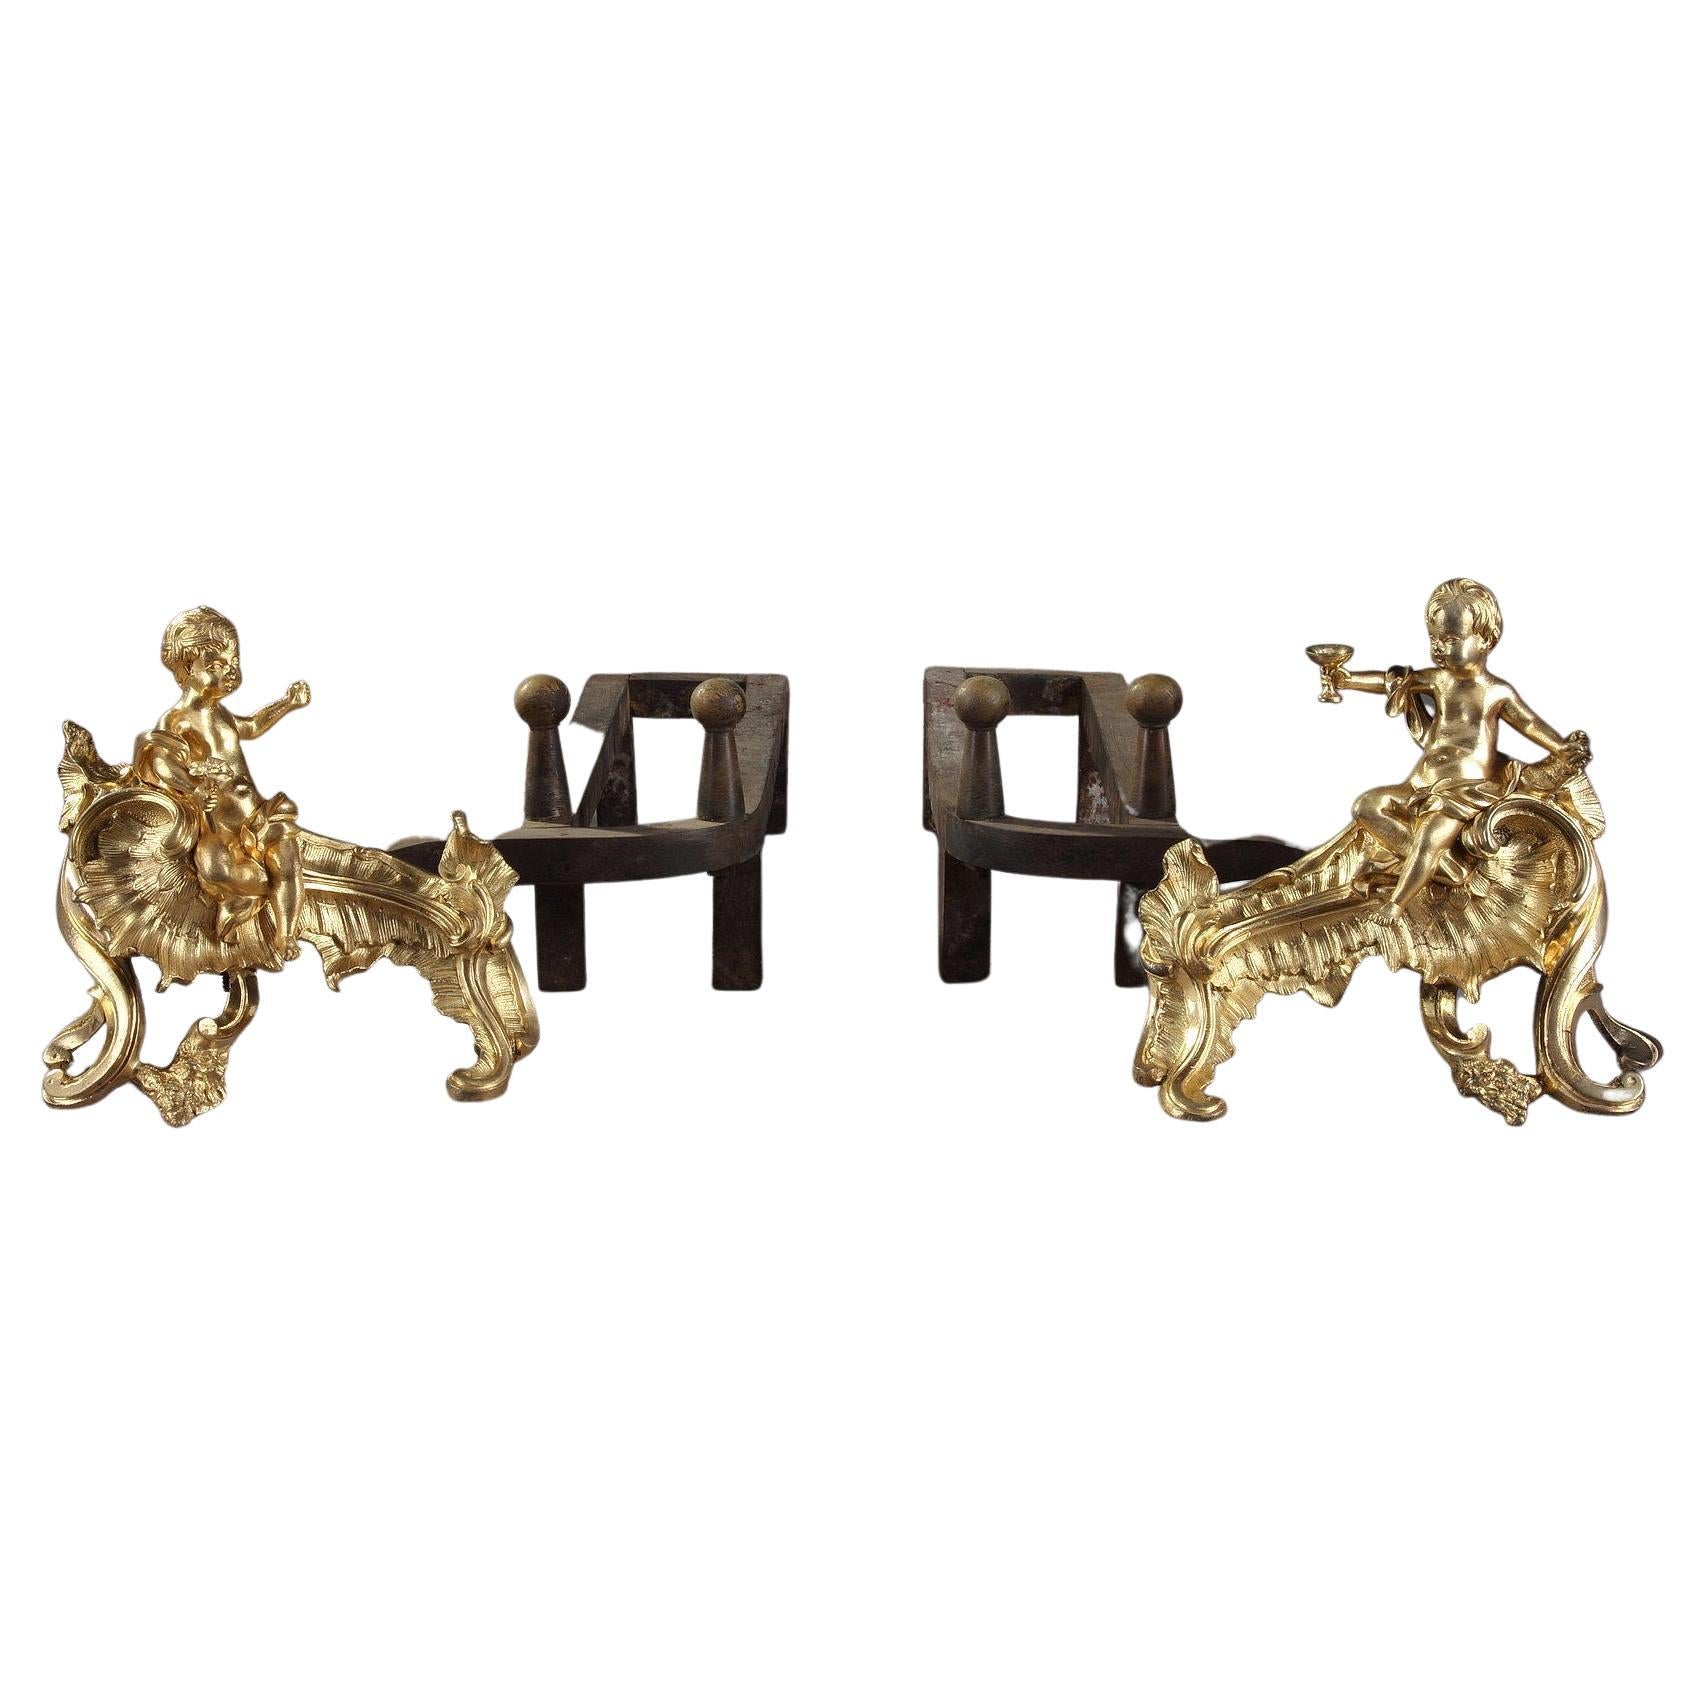 Pair of Chased and Gilded Bronze Andirons from the 18th Century For Sale